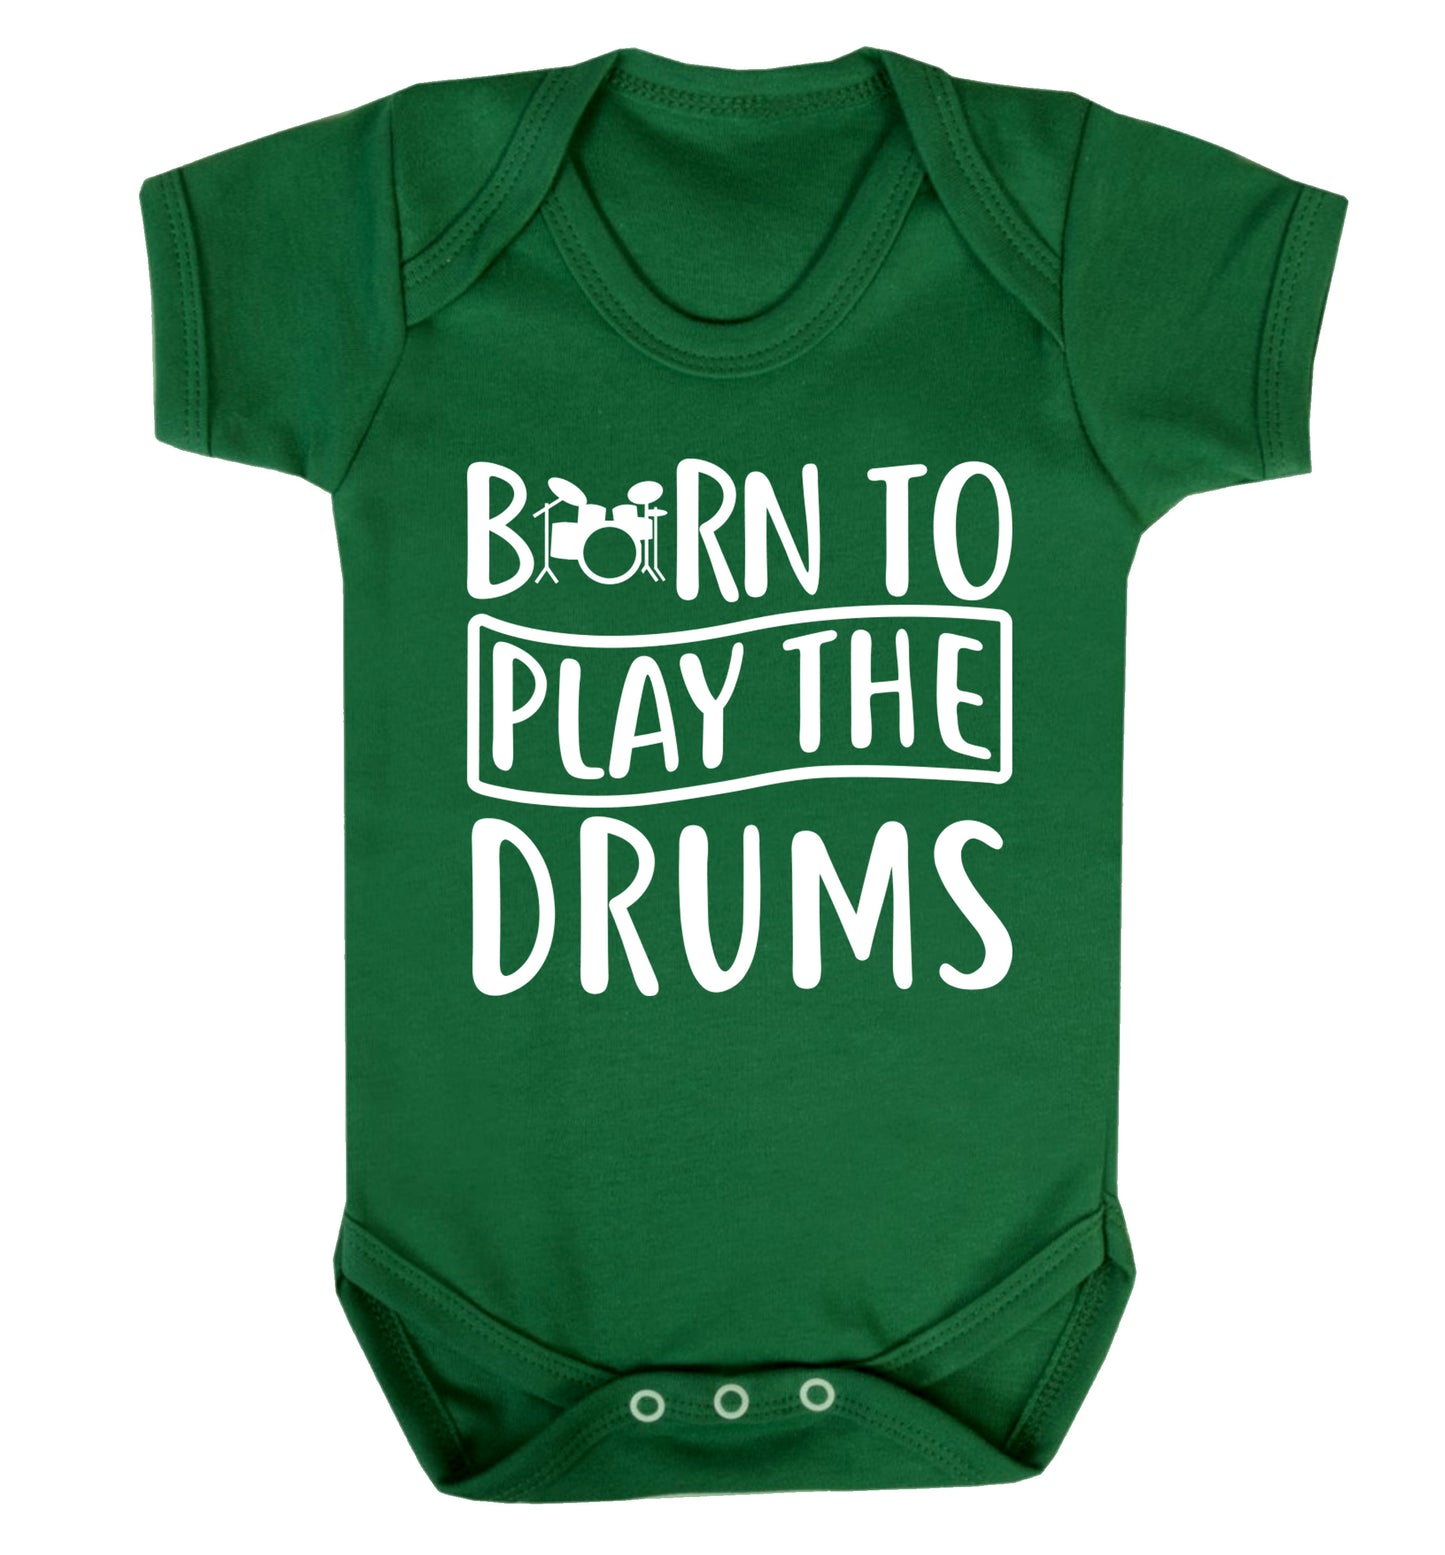 Born to play the drums Baby Vest green 18-24 months